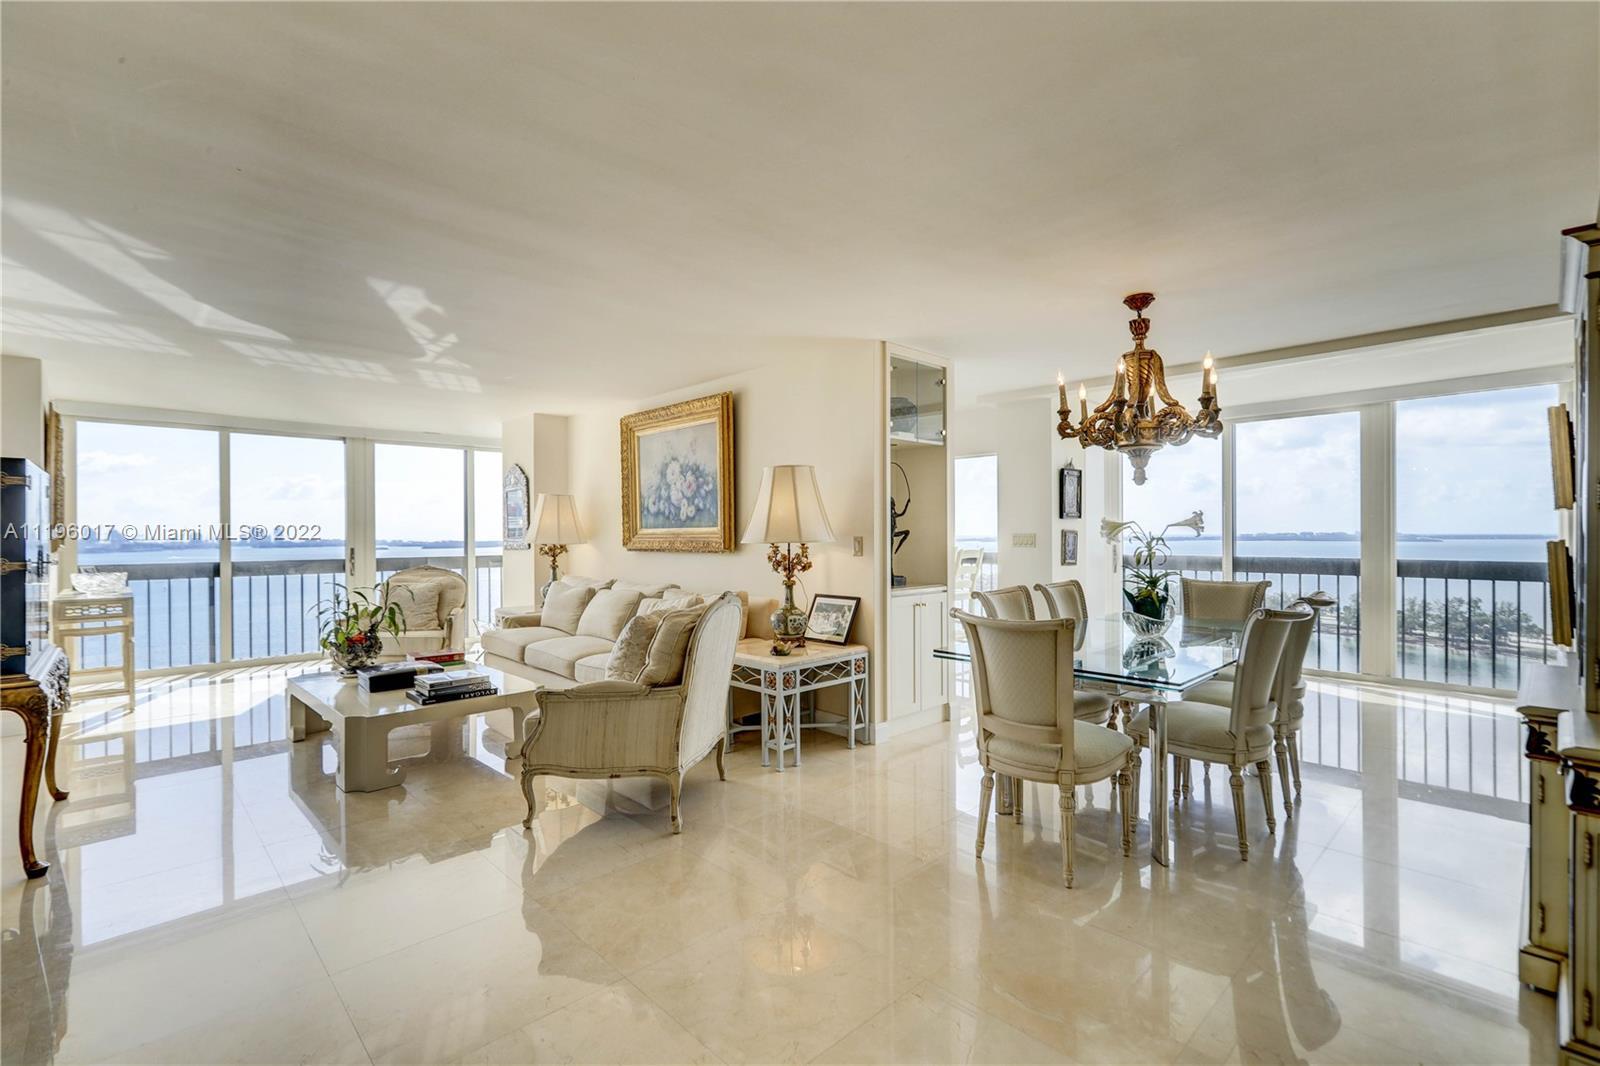 Outstanding professionally combined corner units 2301 & 2303, with spectacular panoramic views of Bi